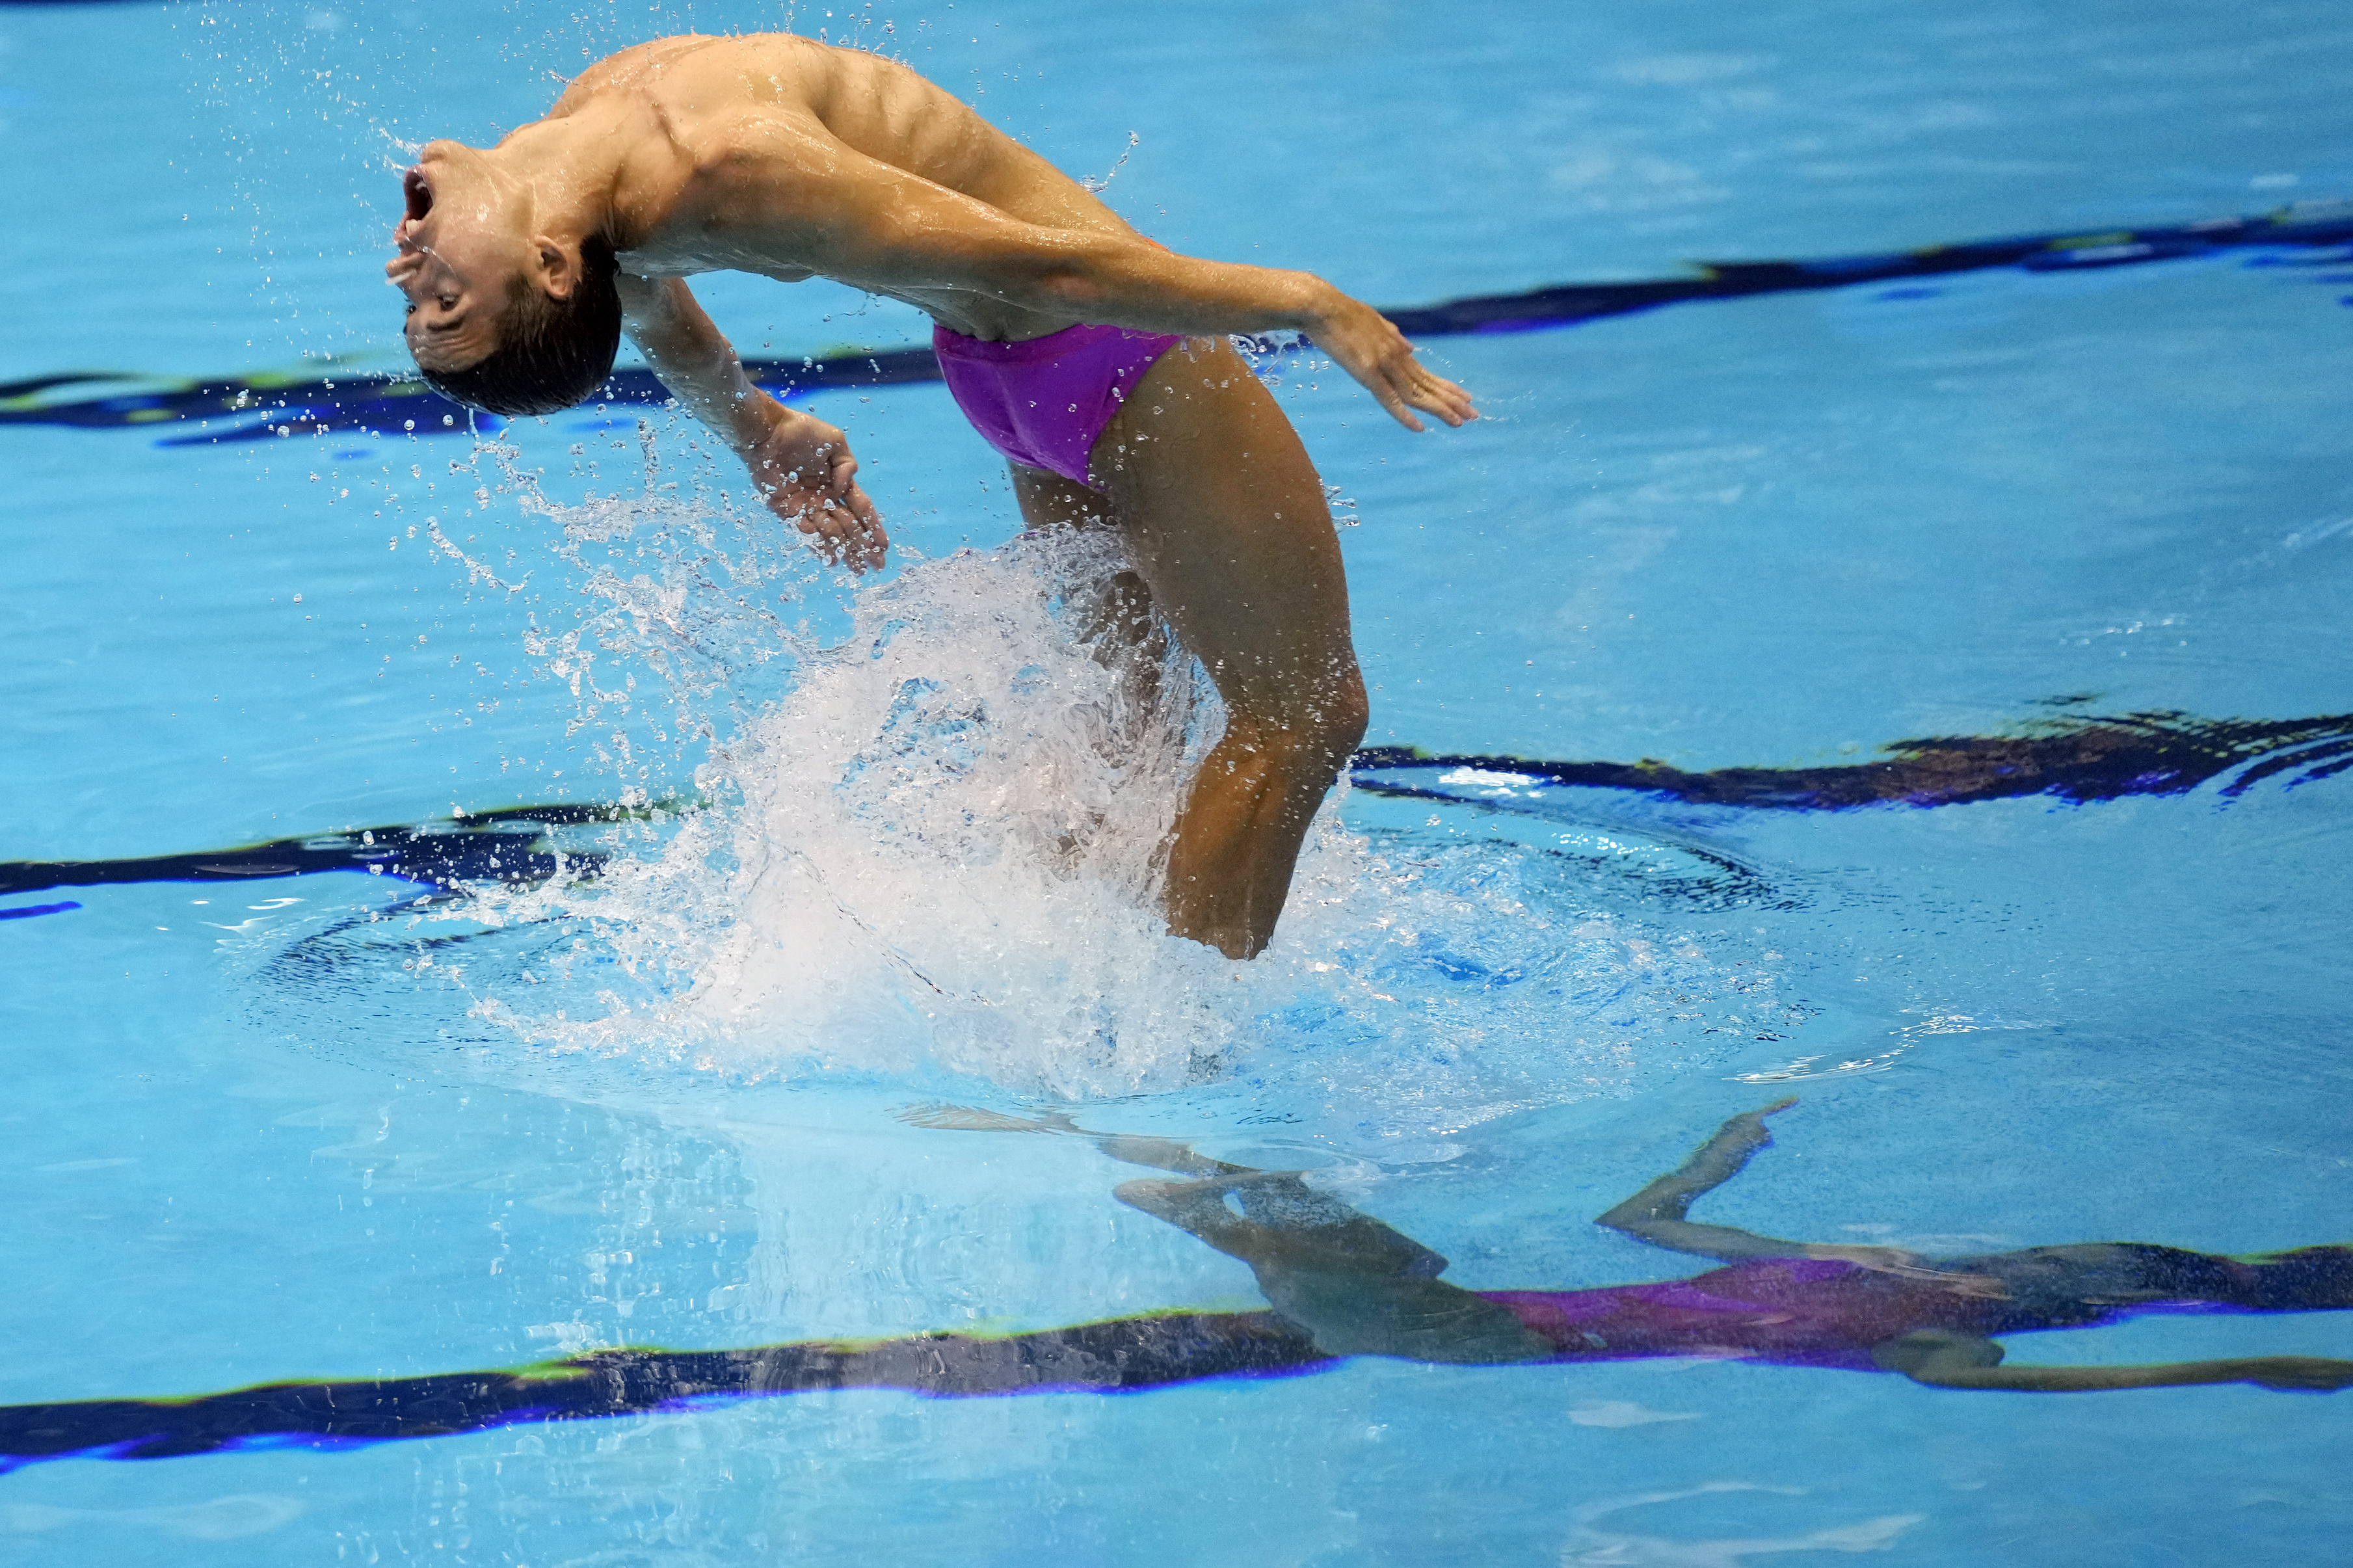 Andy Manuel Avila Gonzalez and Carelys Valdes Castillo of Cuba compete during the mixed duet free preliminary of the artistic swimming at the World Swimming Championships in Fukuoka, Japan,Friday, July 21, 2023. (AP Photo/Eugene Hoshiko)